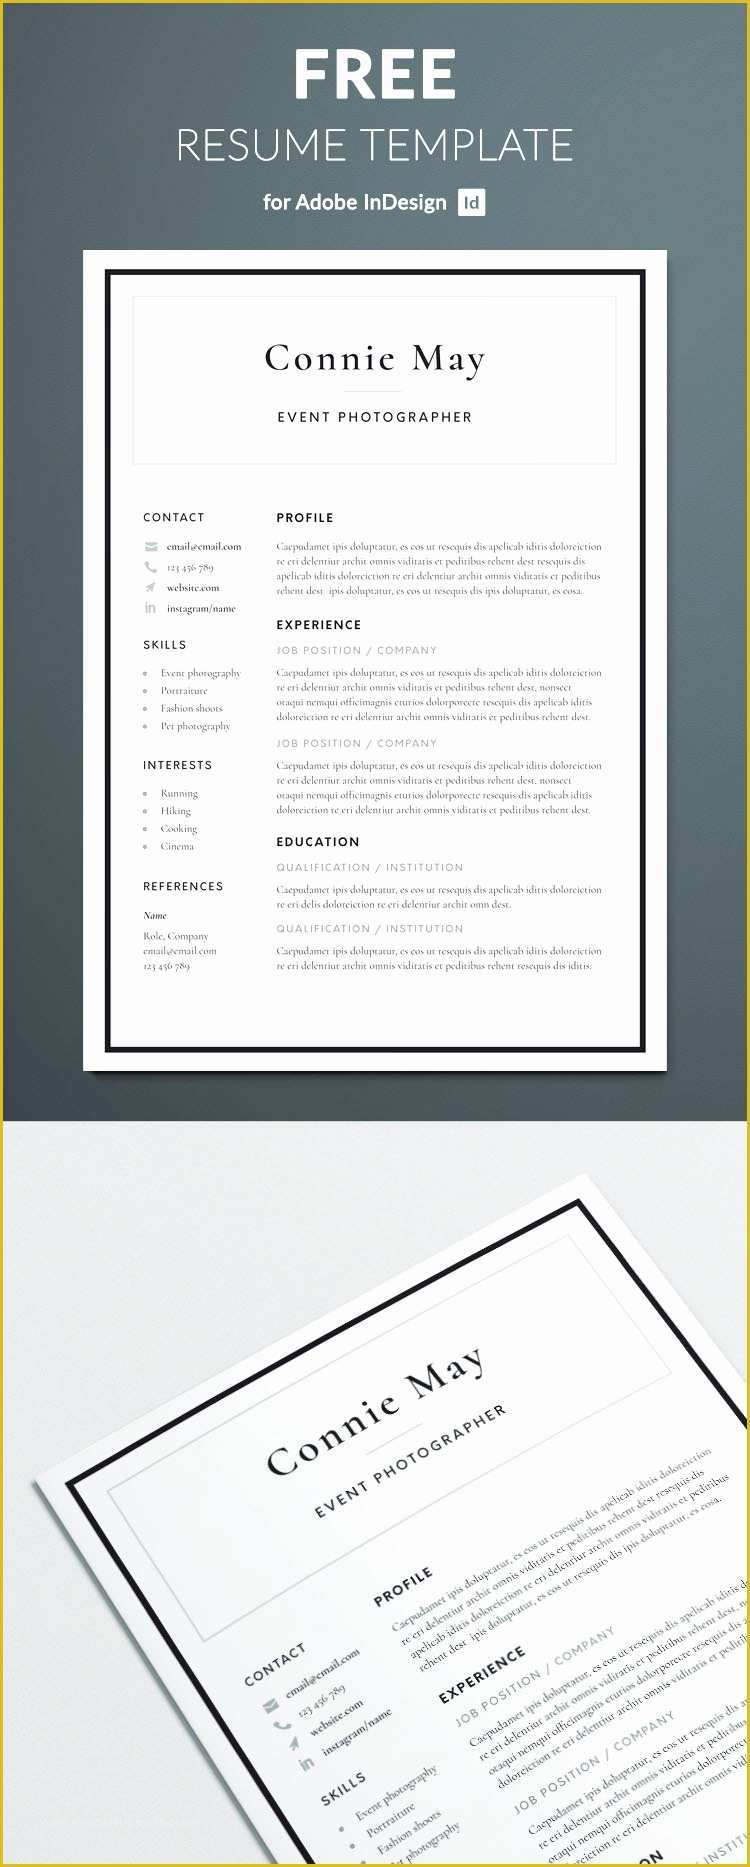 Resume Indesign Template Free Download Of Simple Resume Template for Indesign